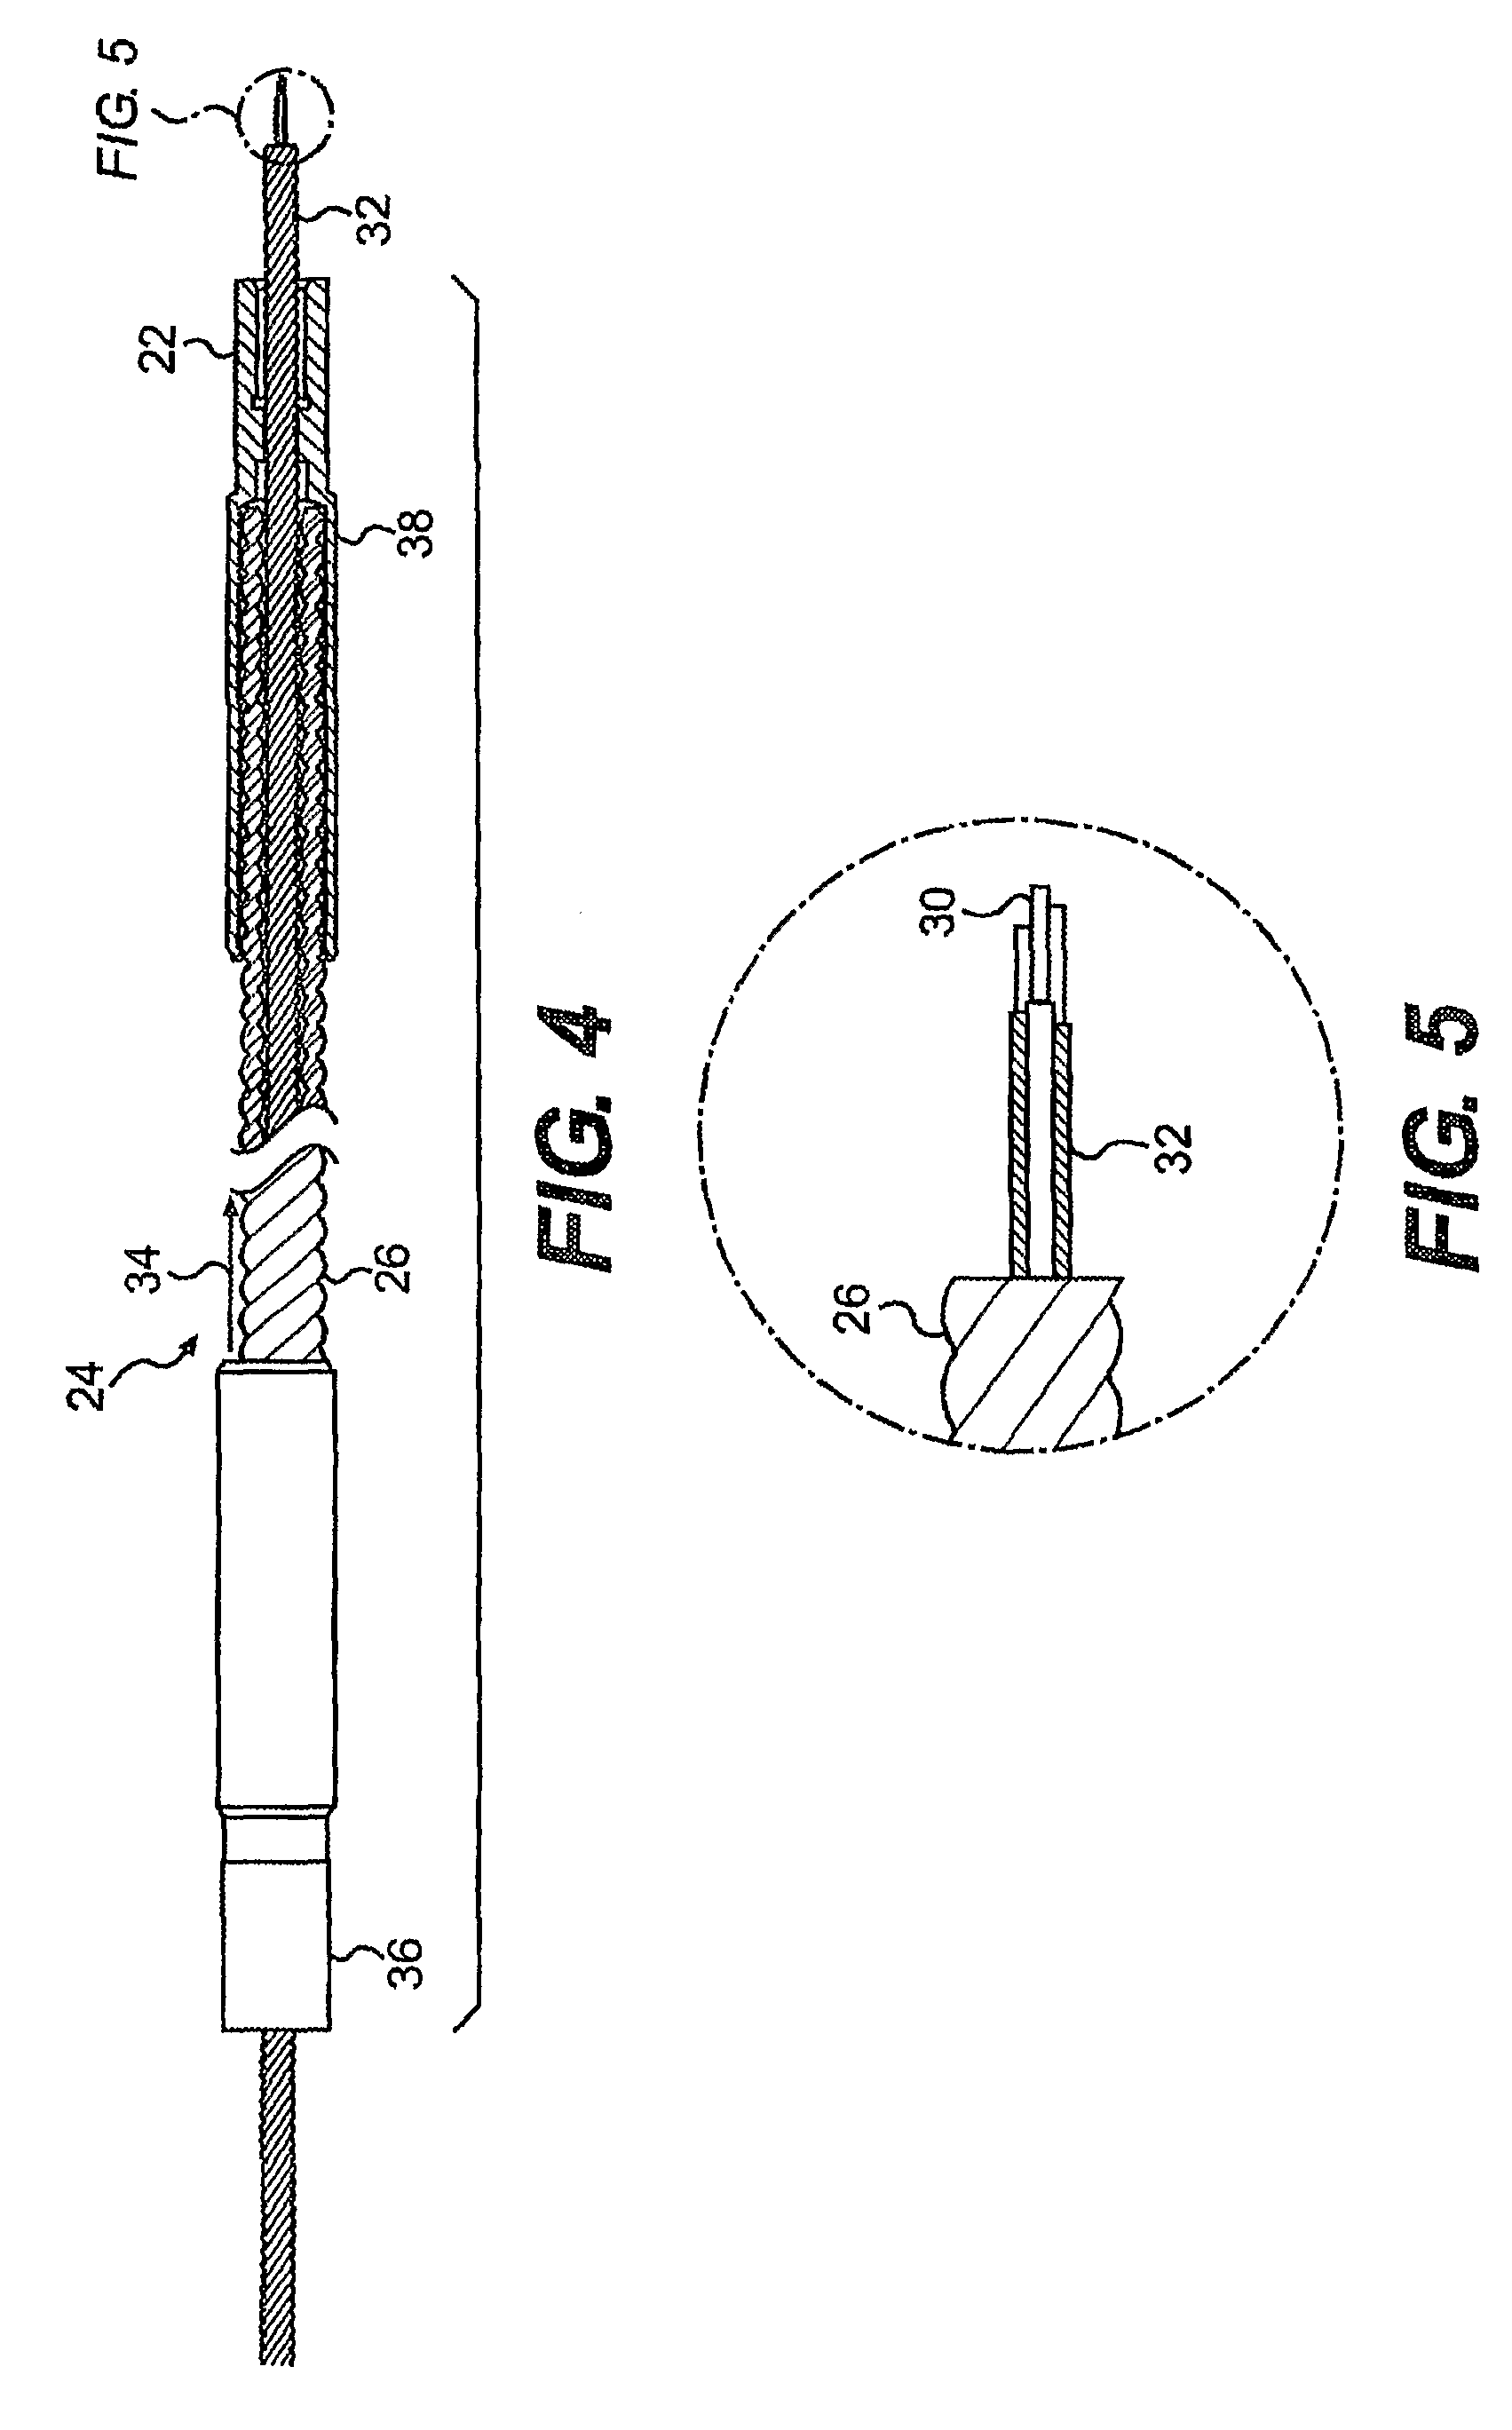 Flexible sinker bar with electrically conductive wires